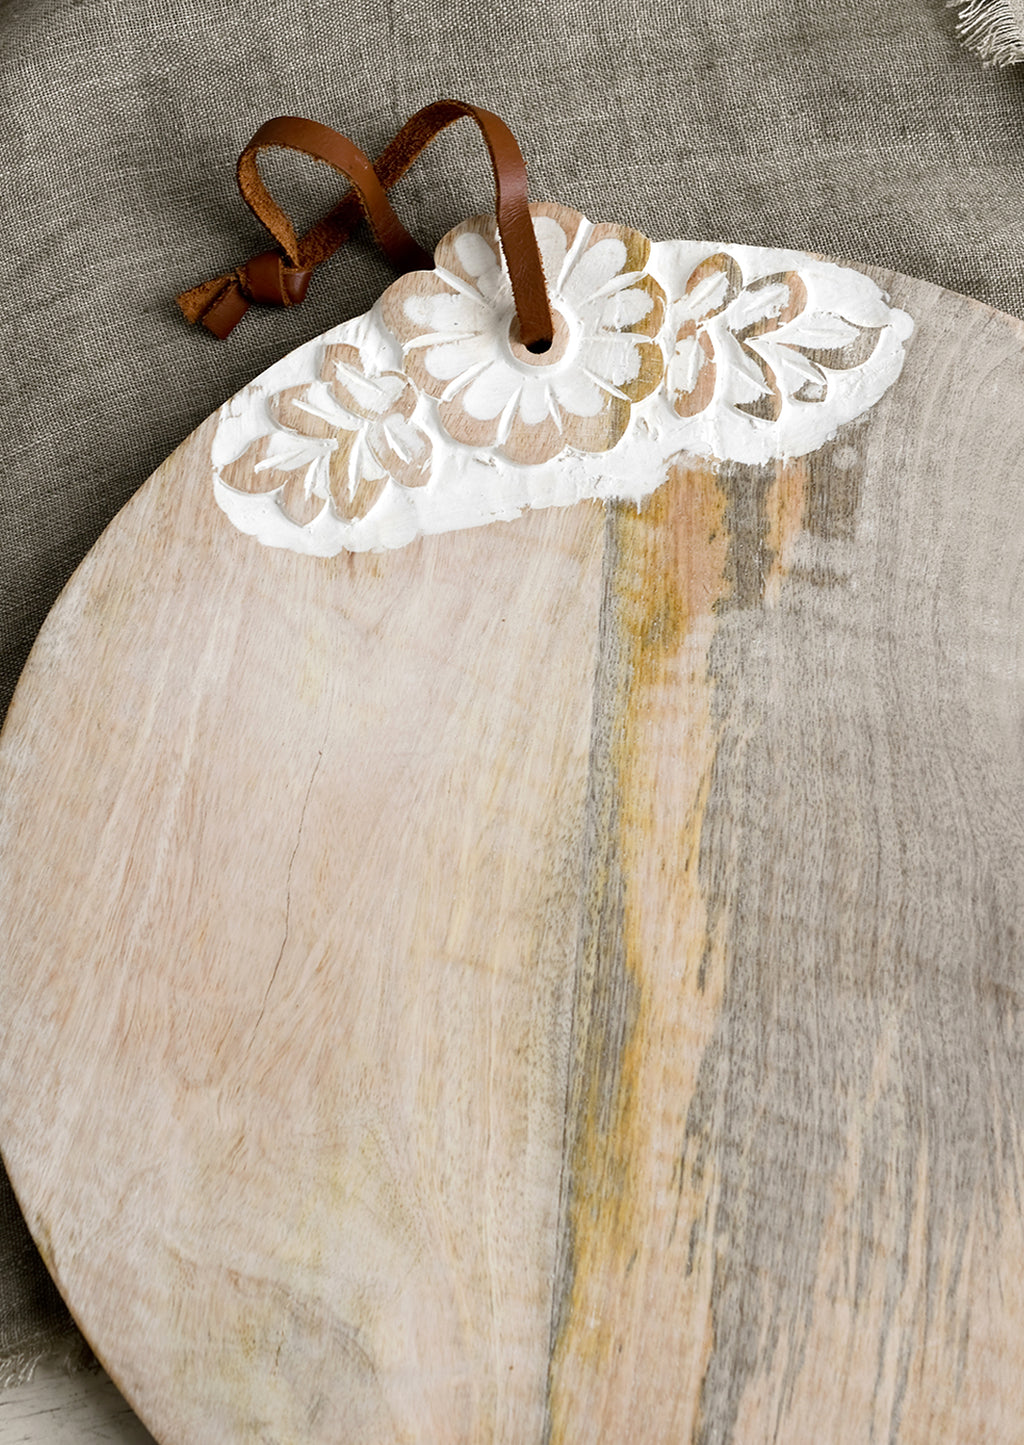 2: A round wooden cutting board with shabby chic floral detailing.